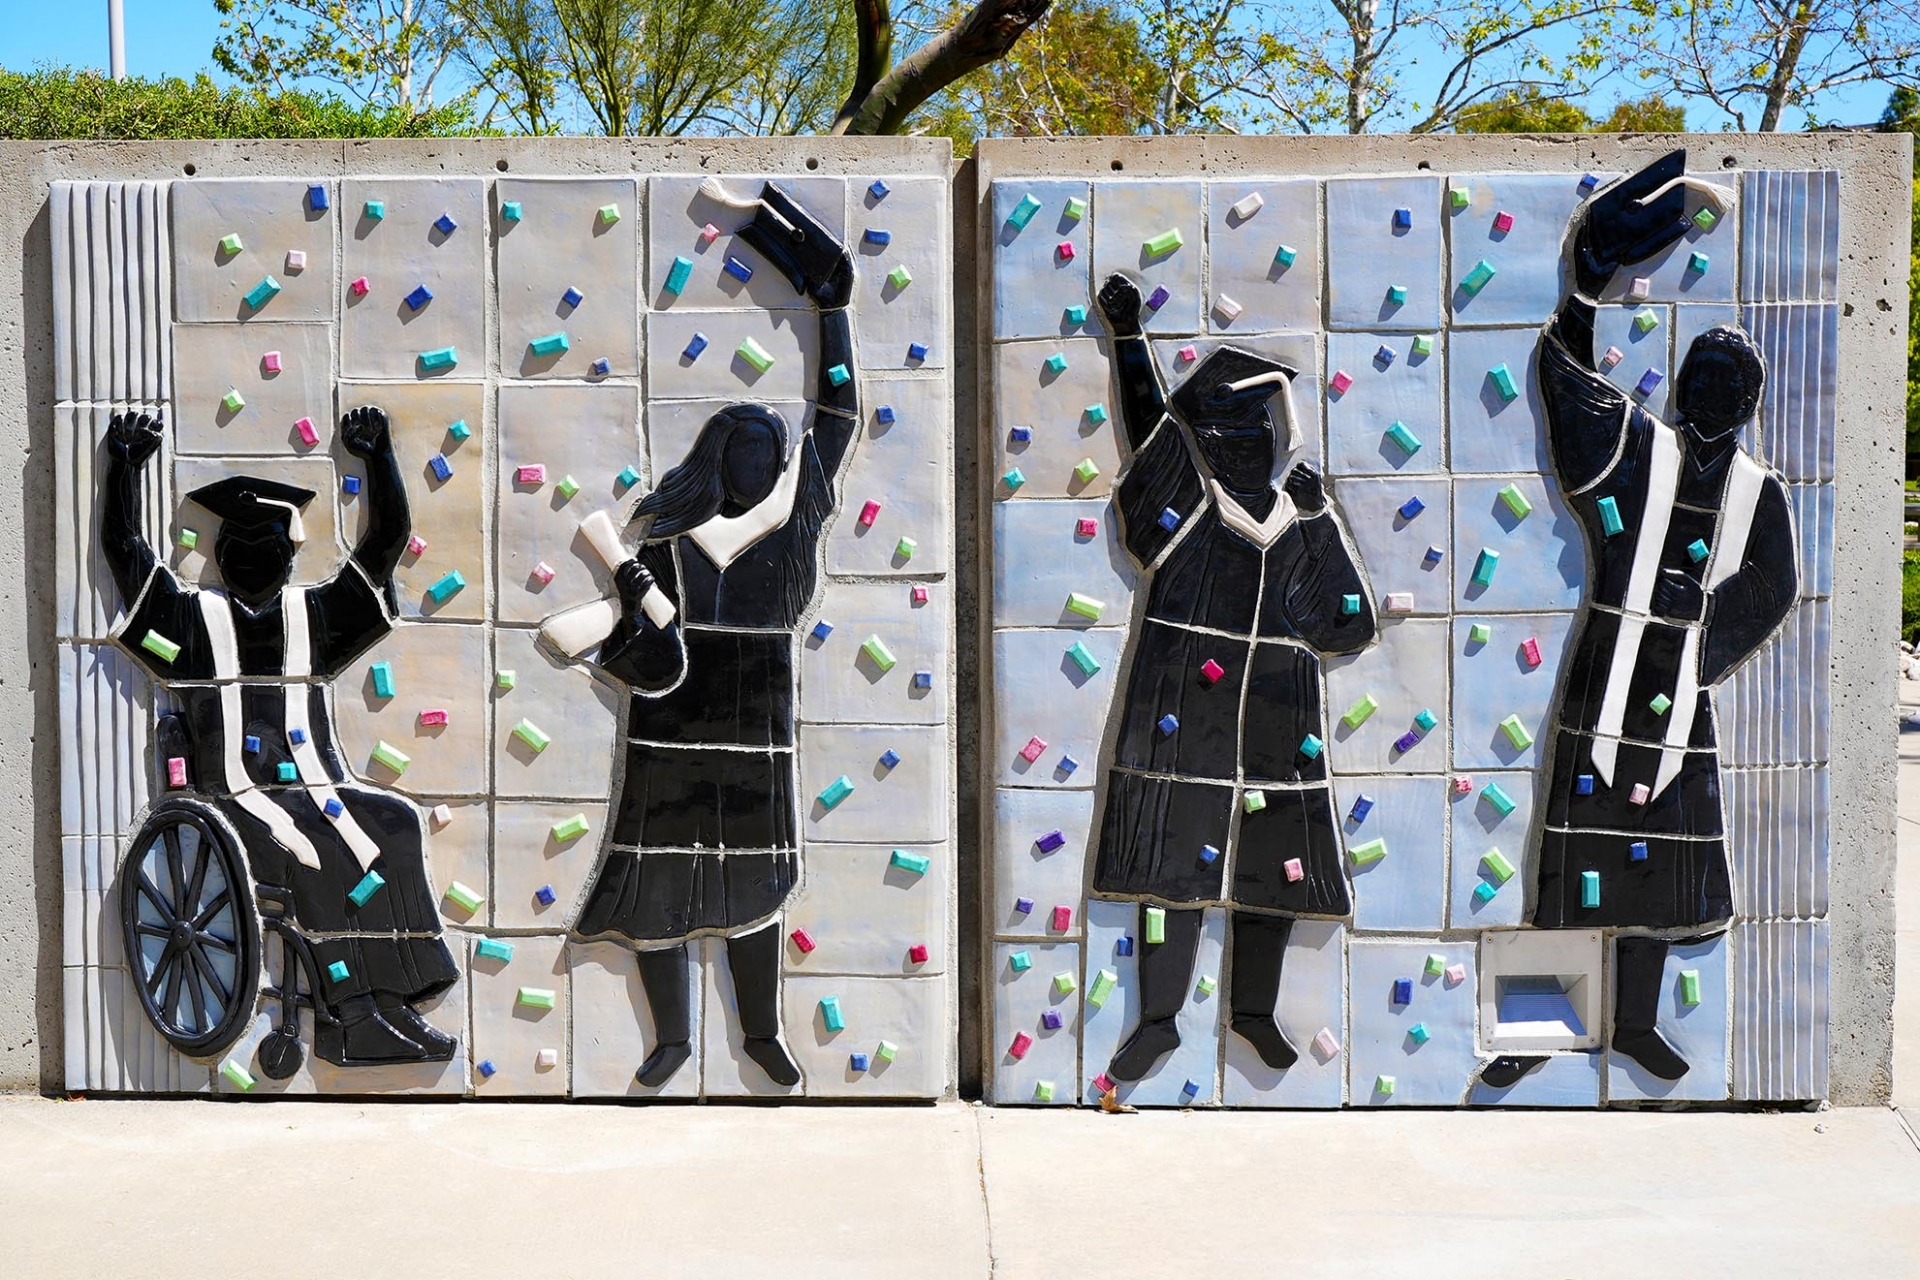 The “Selfie Wall” at the “Eternal Learning” mural is envisioned as a place where graduates and their families and friends will take photos celebrating their graduation from CSUSB.